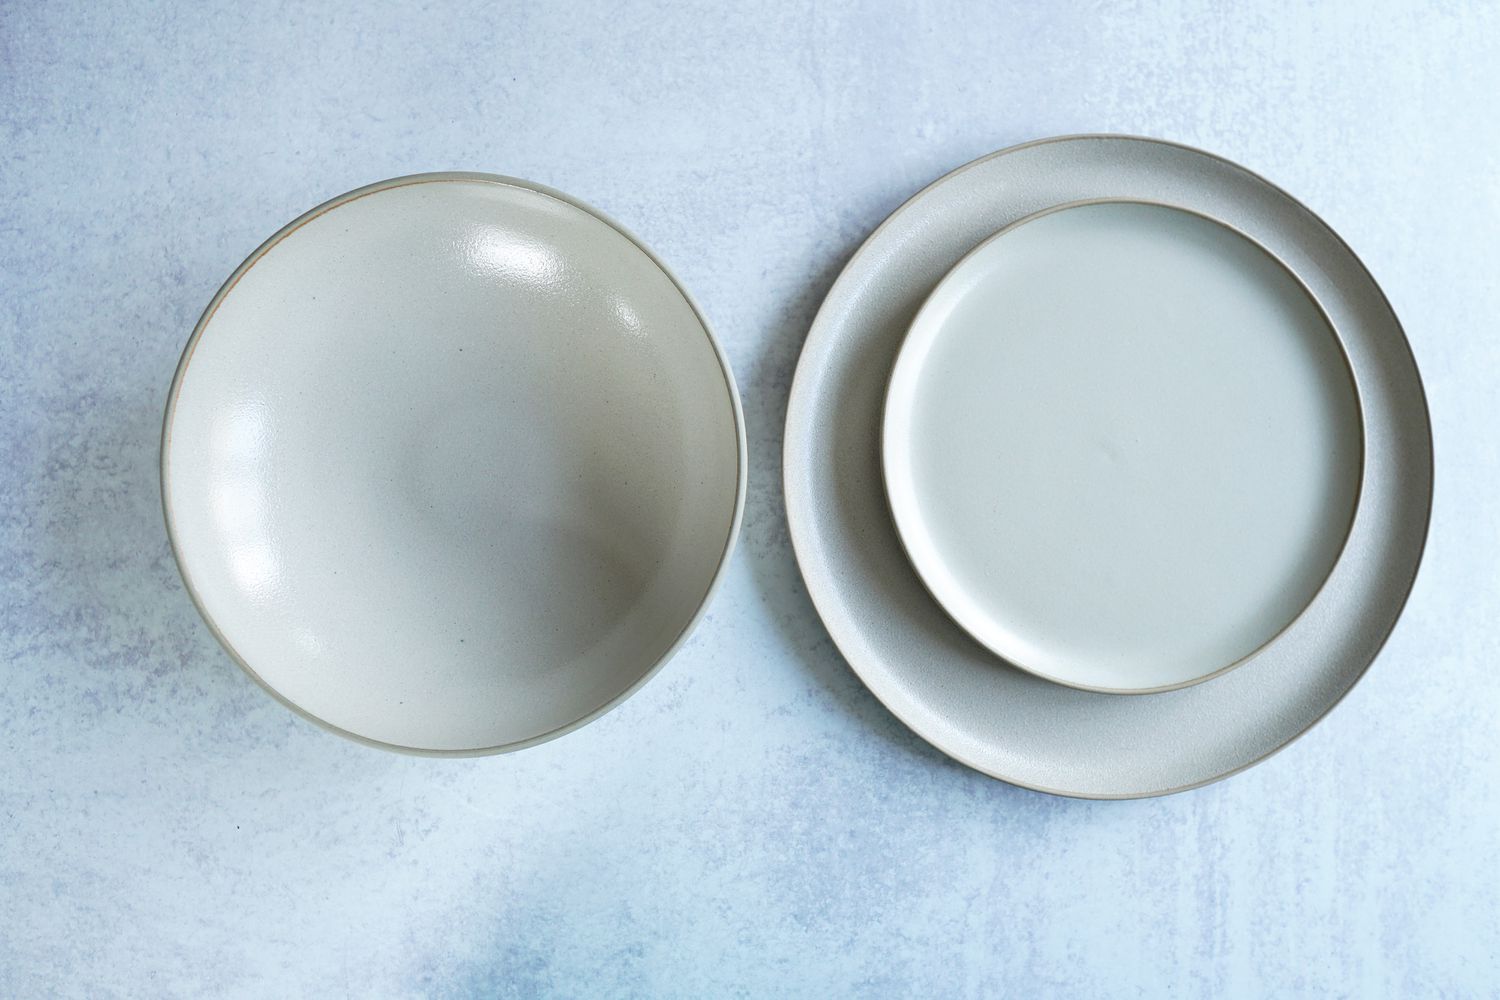 a white and brown dinnerware set on a grey surface